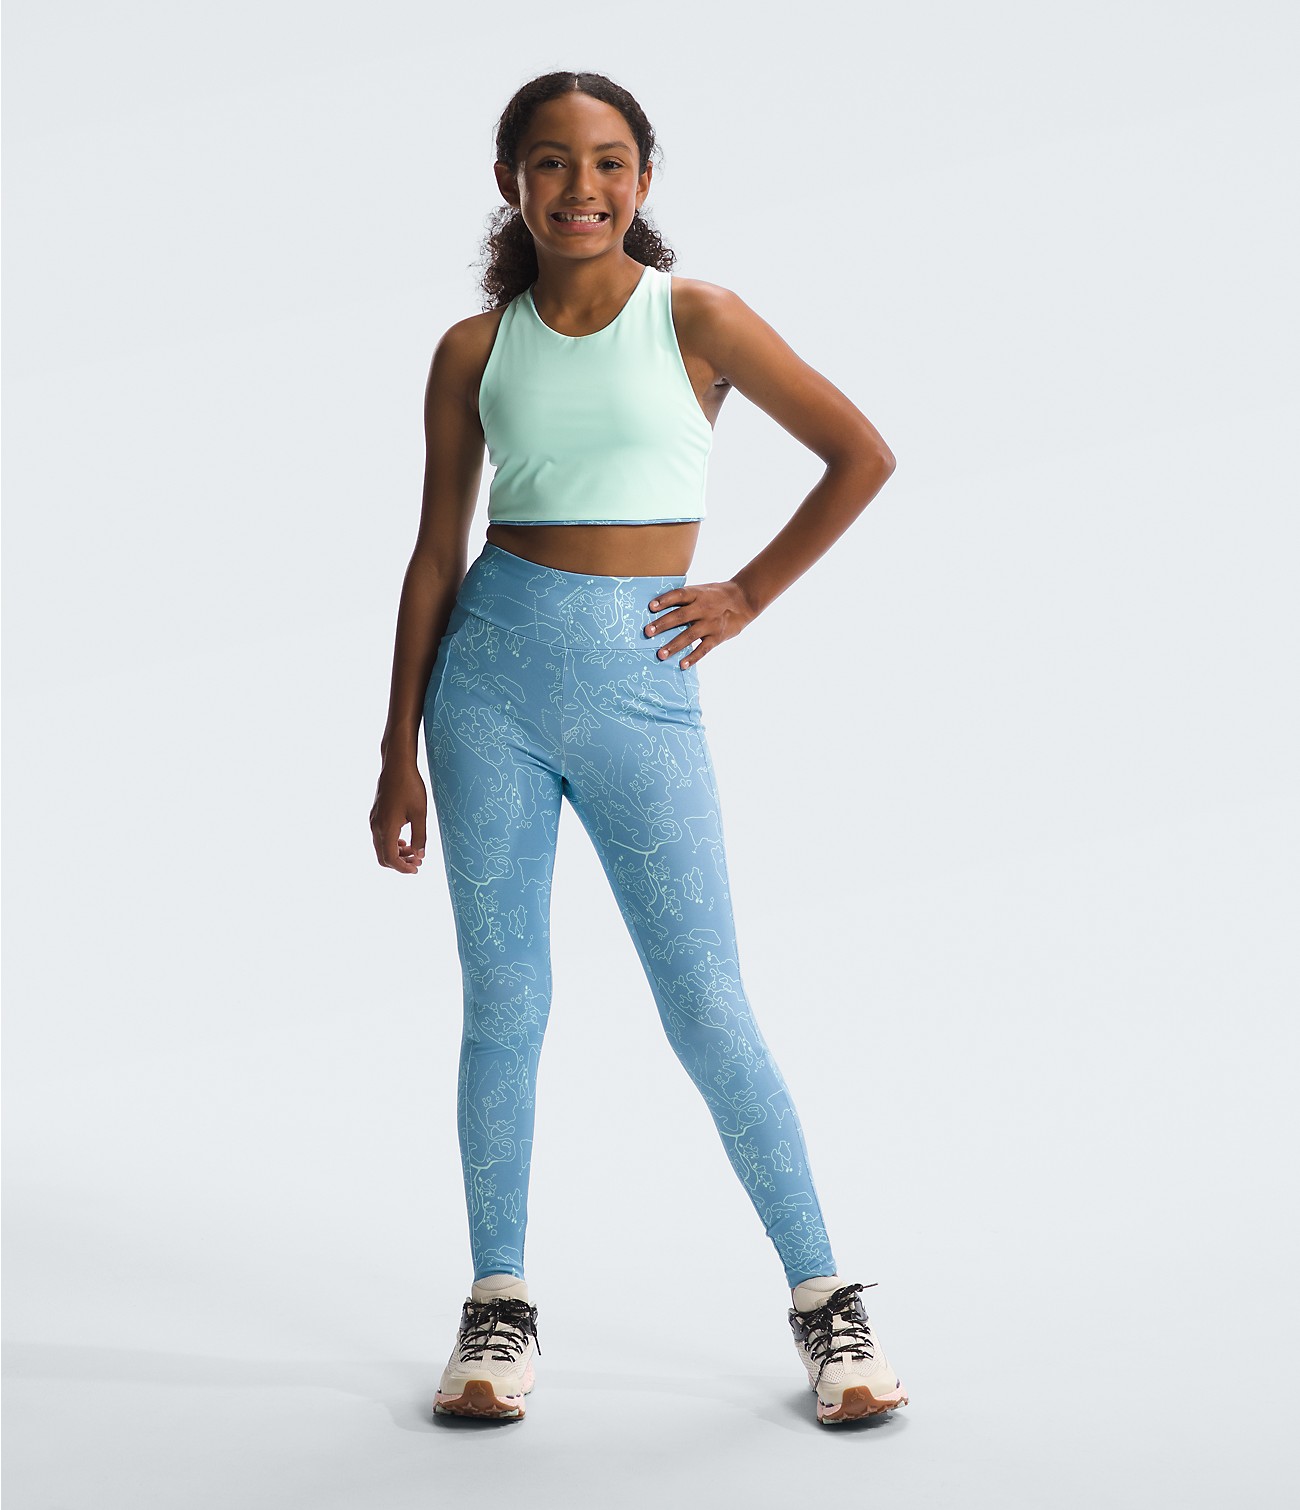 Girls’ Never Stop Tights | The North Face